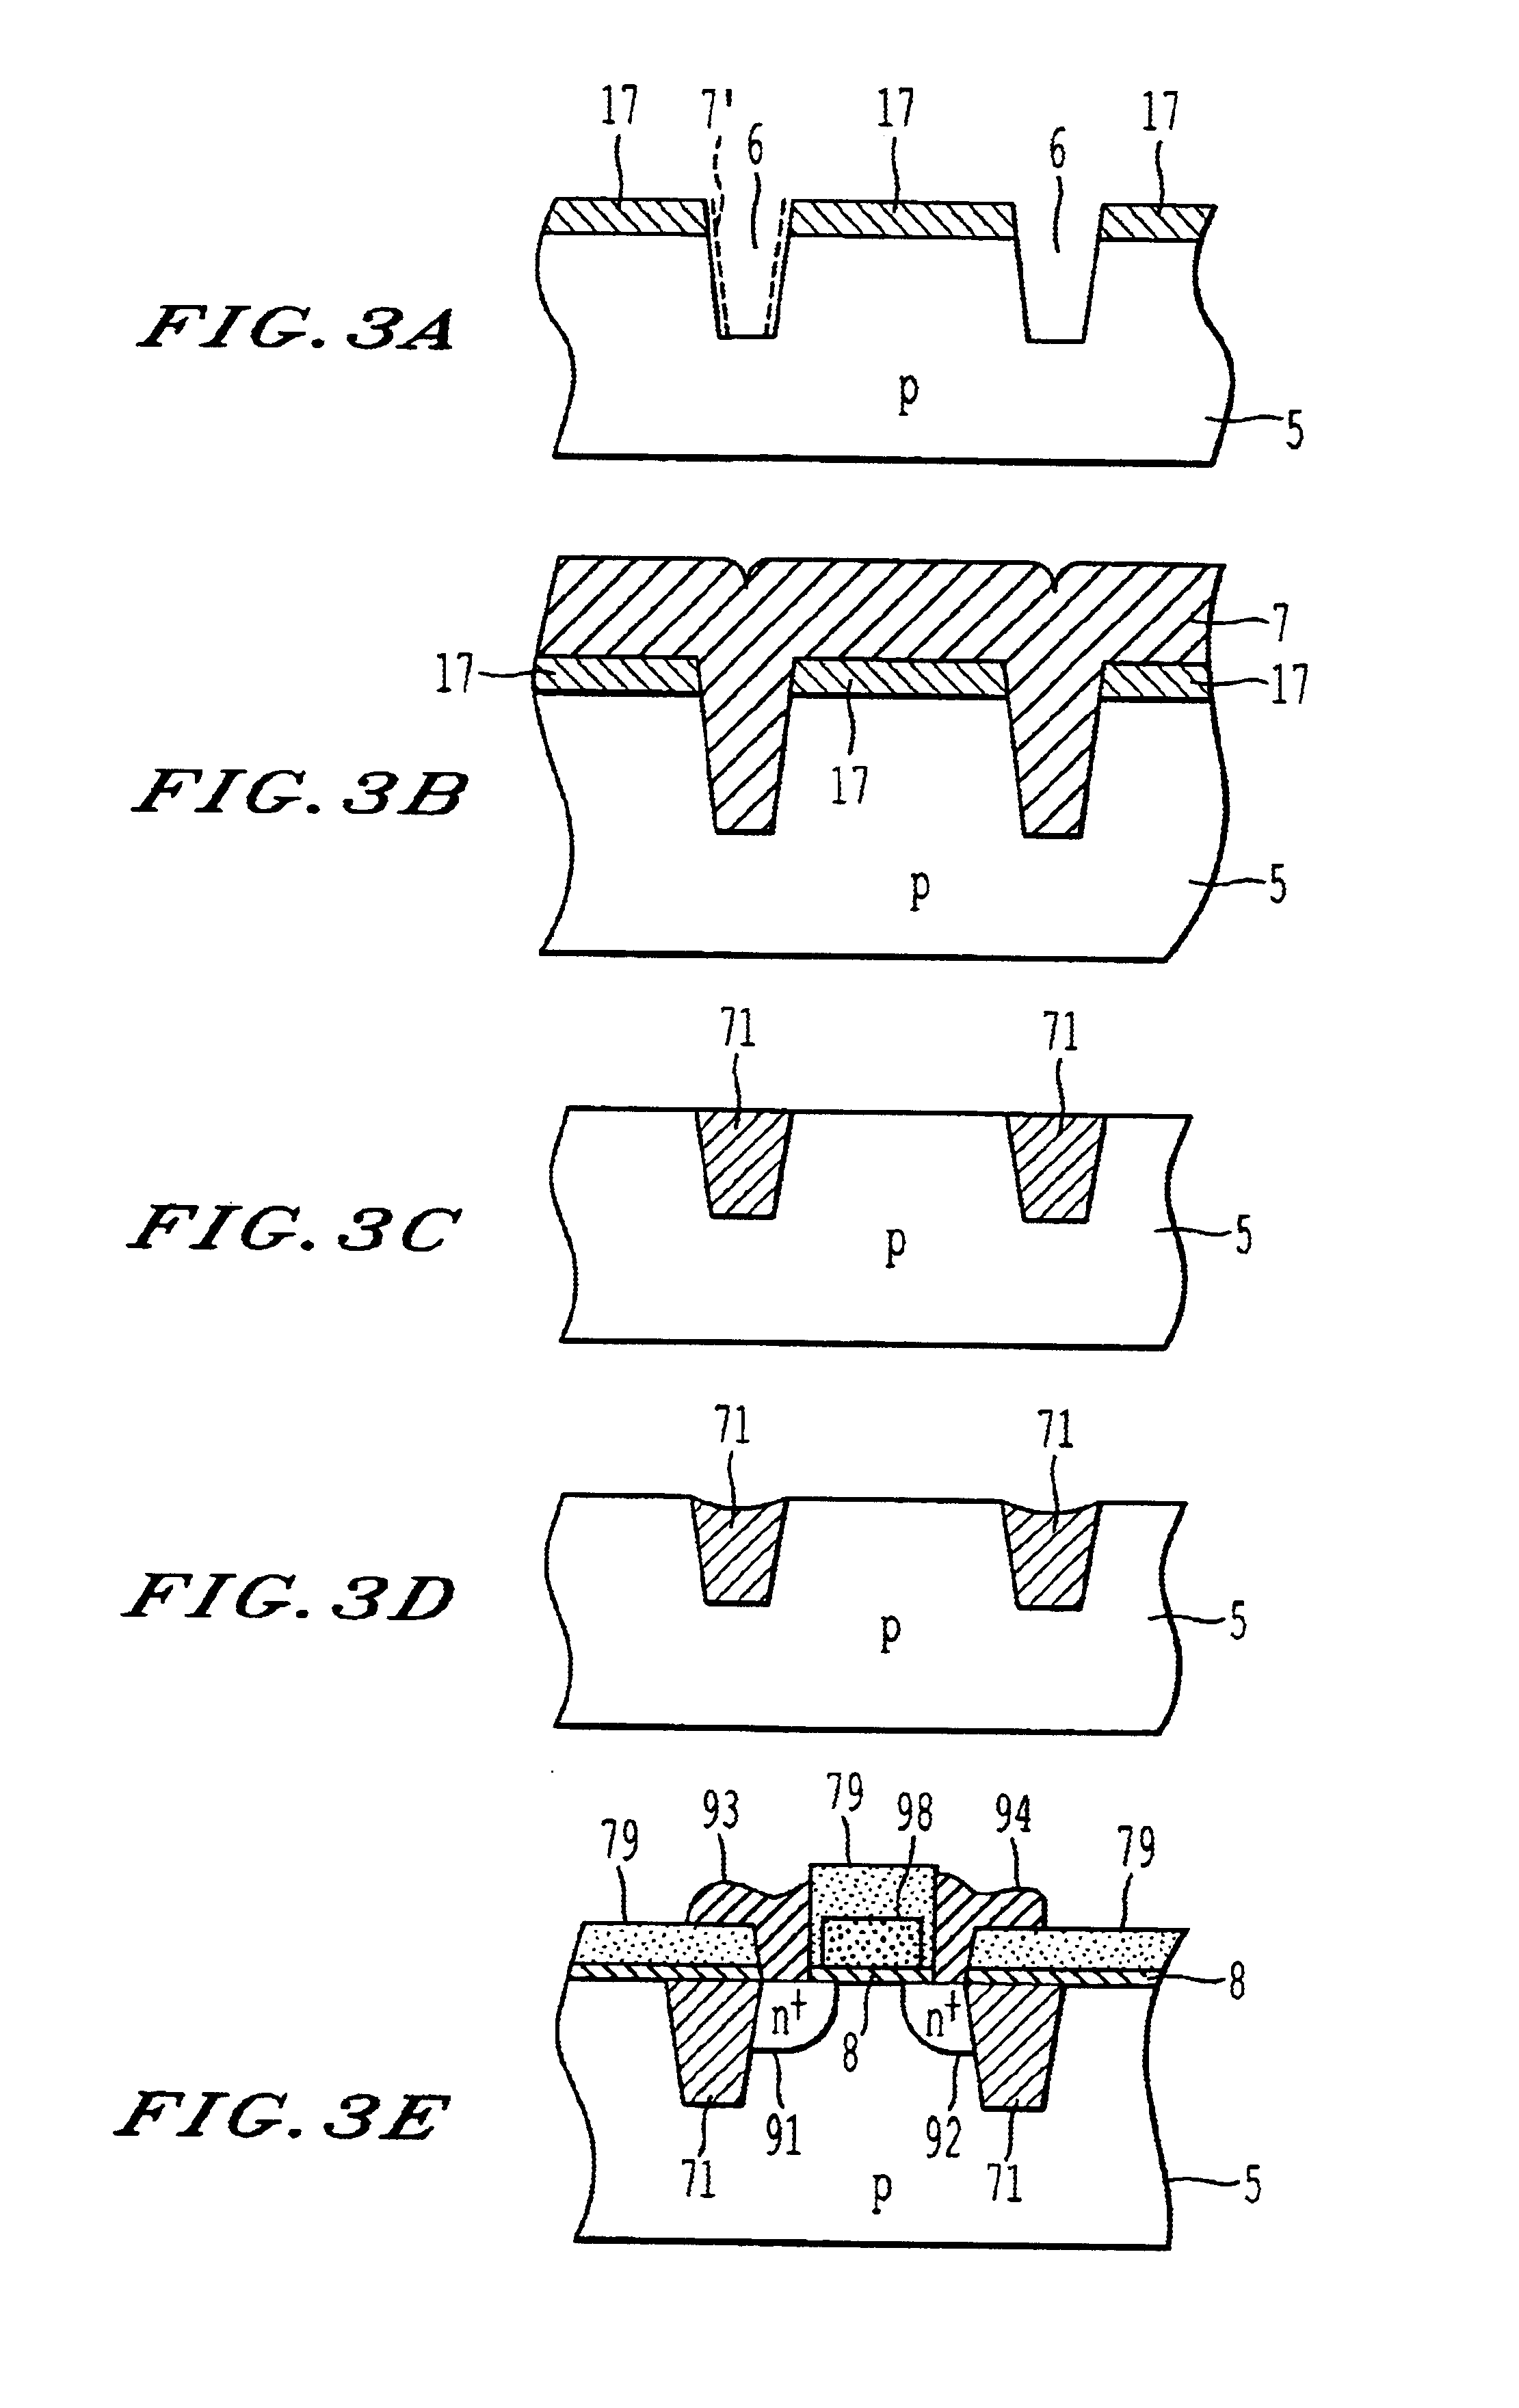 Method of manufacturing a substrate having shallow trench isolation